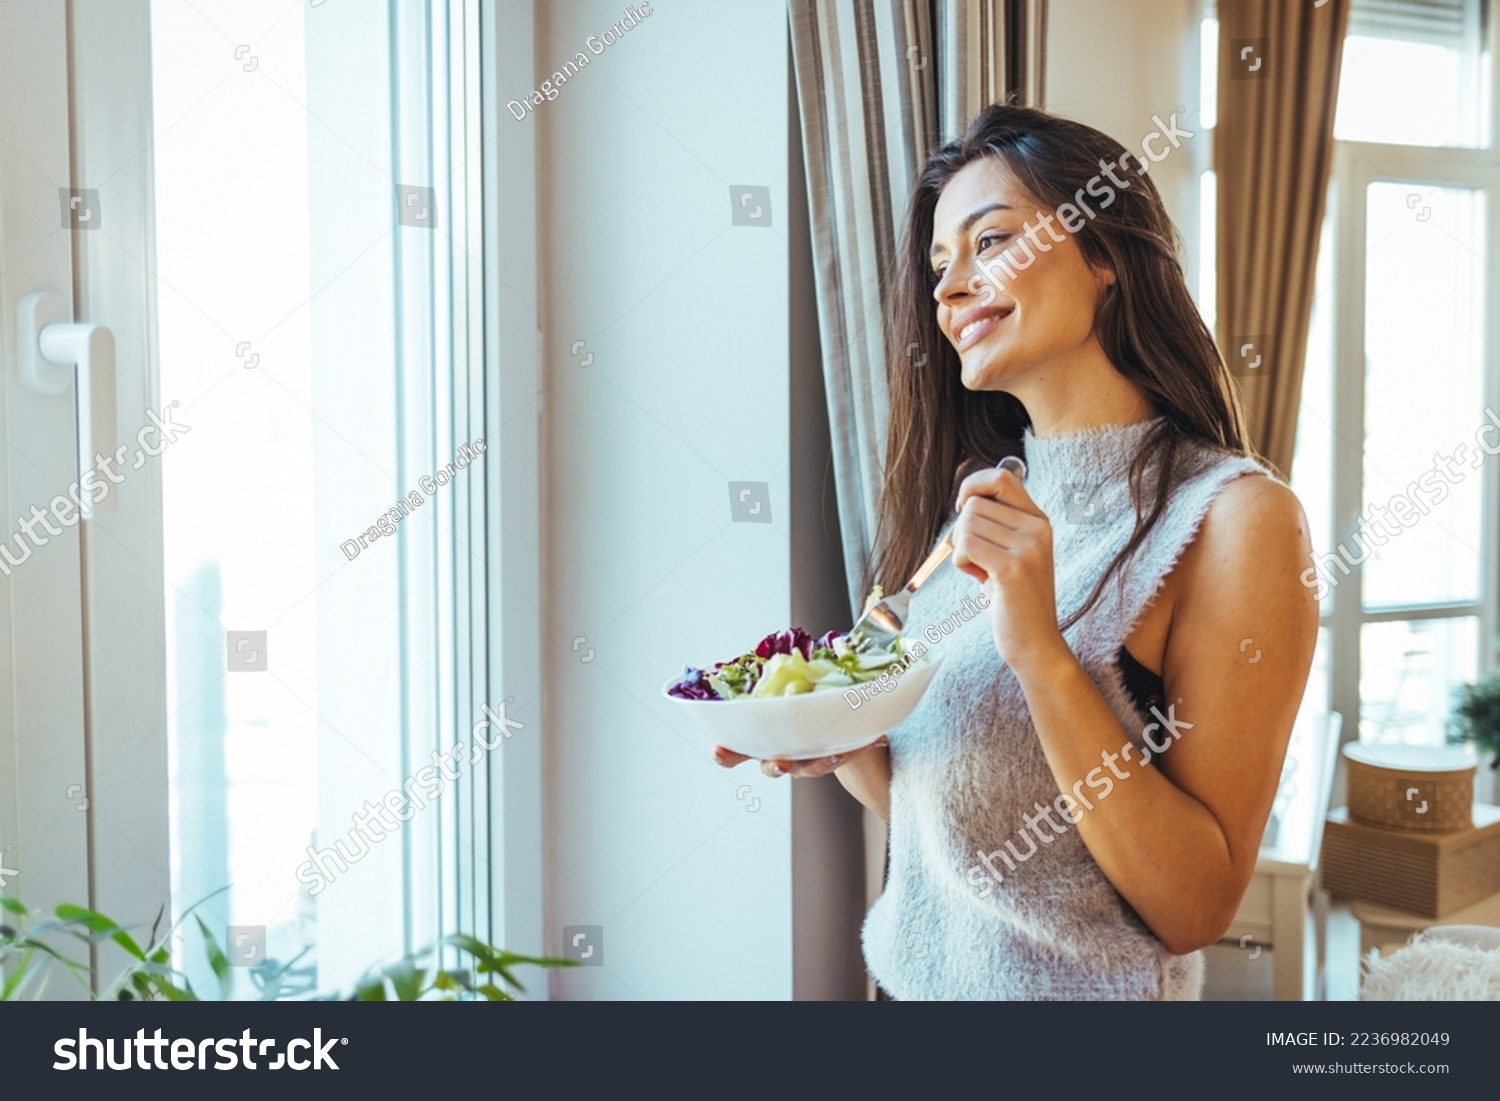 Photo of young woman enjoying a delicious salad at home during the day. Portrait of a young and cheerful woman eating healthy salad. Healthy eating, wellbeing and lifestyle concept #2236982049